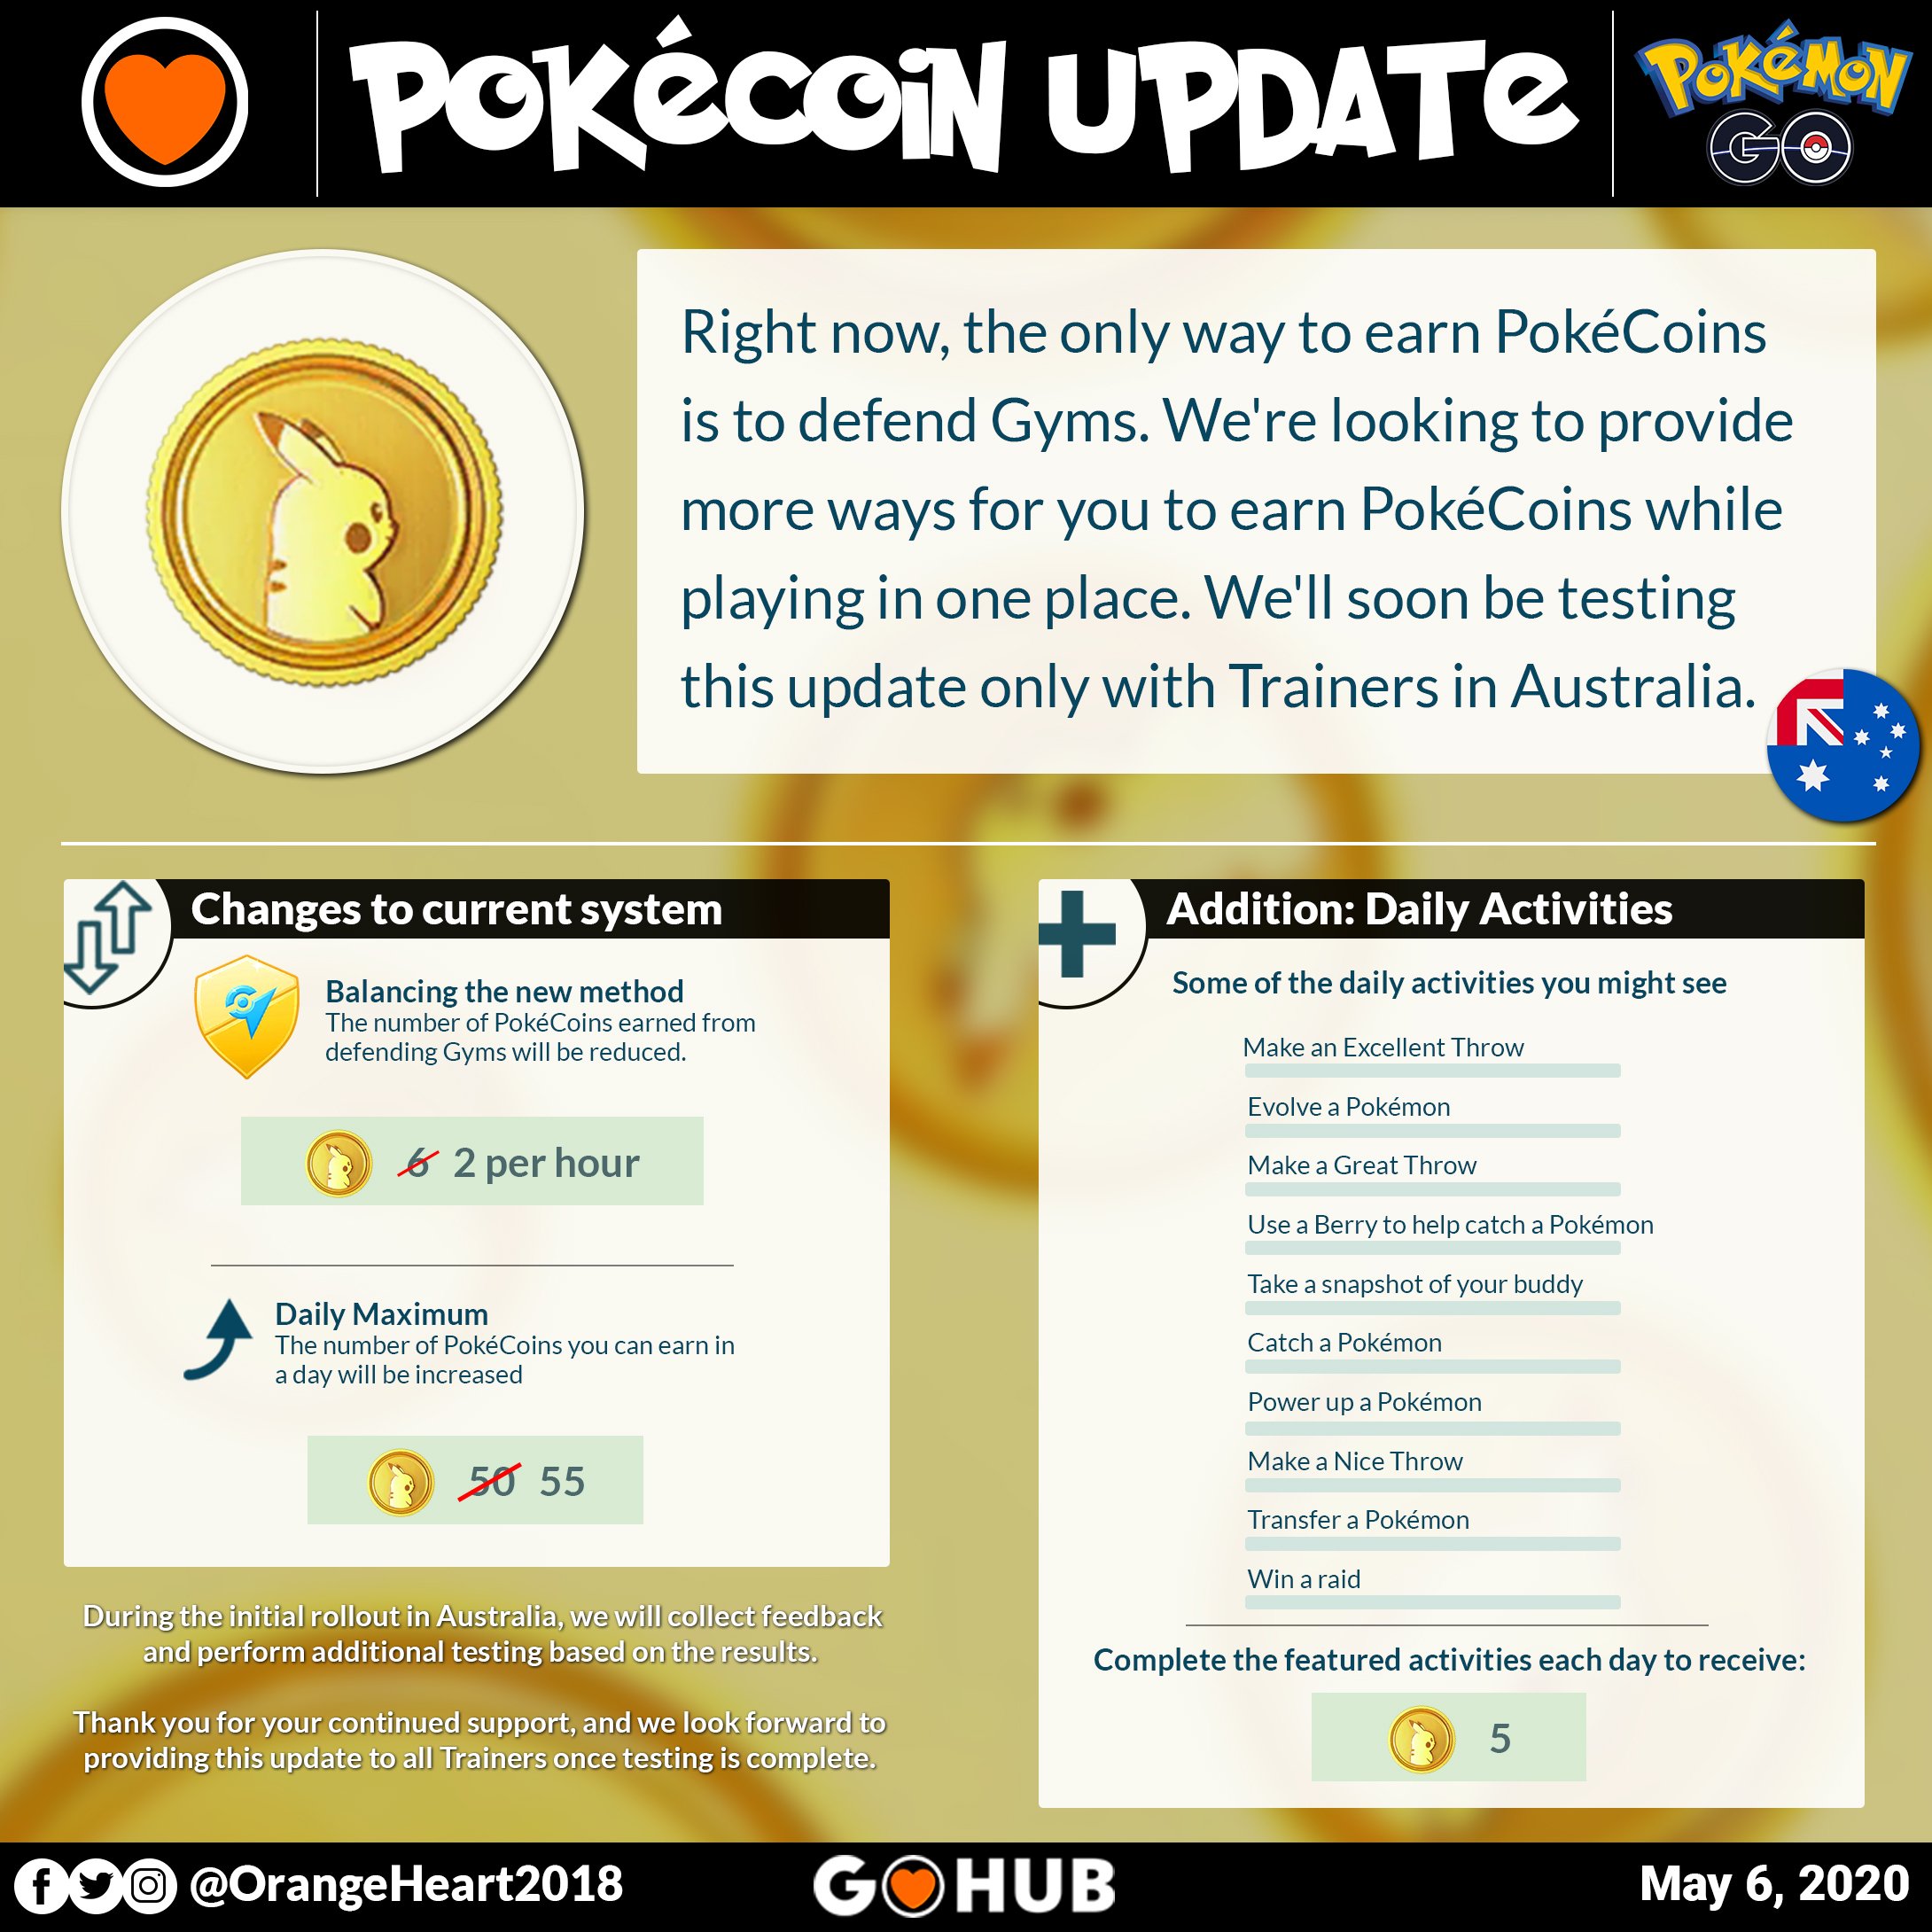 We’ll be running small tests for revamping the PokéCoin system – Pokémon GO